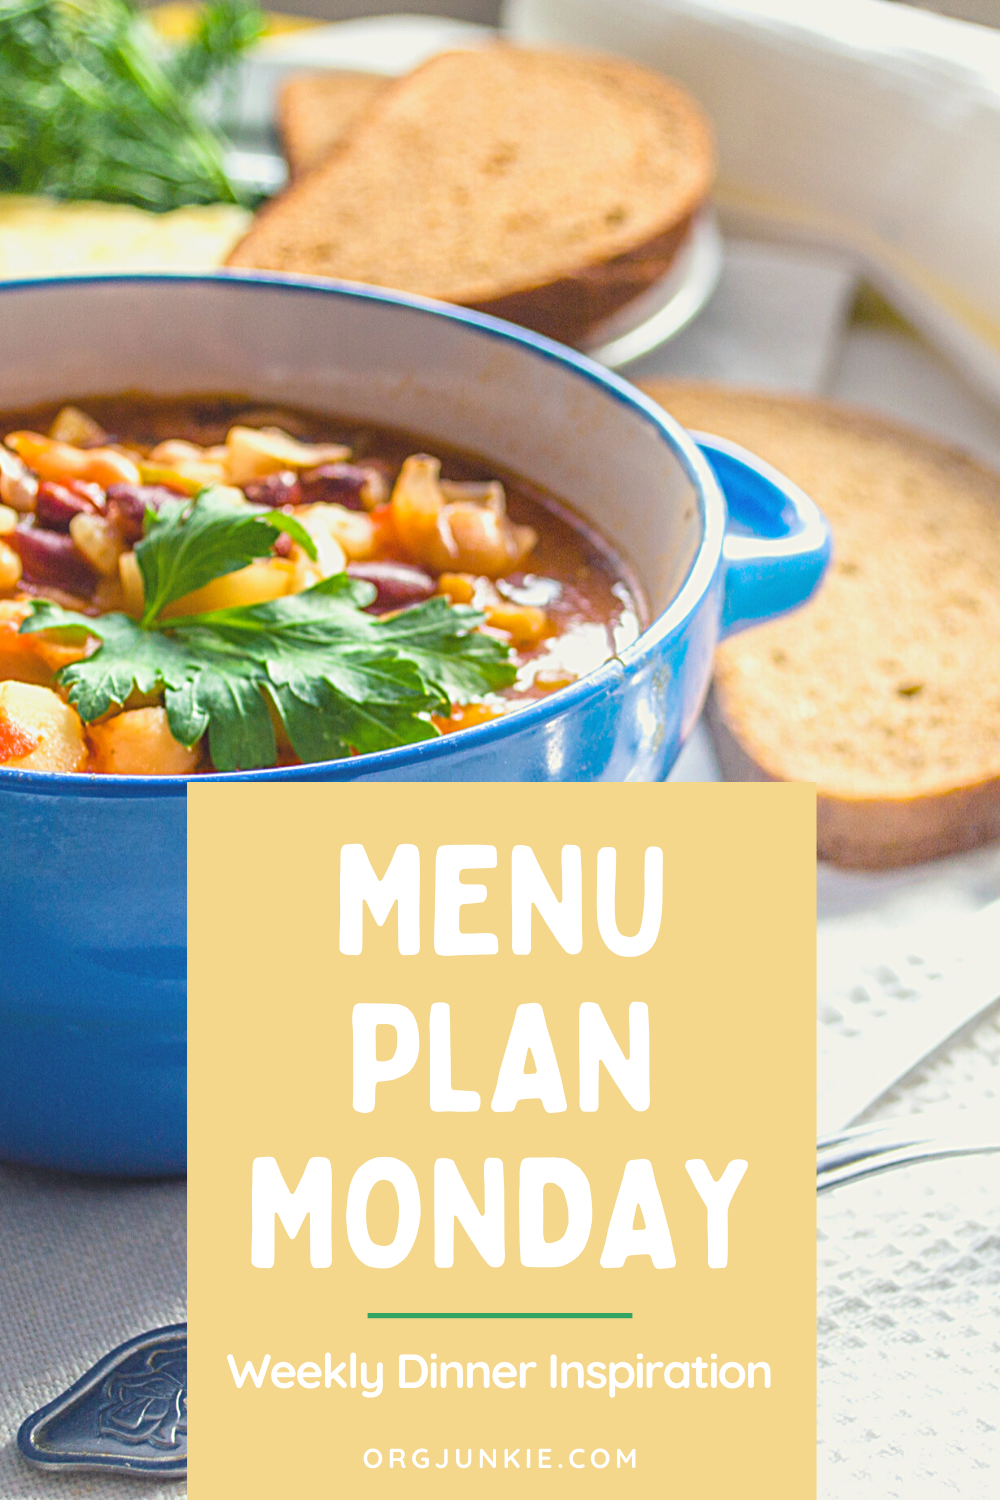 Menu Plan Monday for the week of Oct 19/20 ~ Weekly Dinner Inspiration at I'm an Organizing Junkie